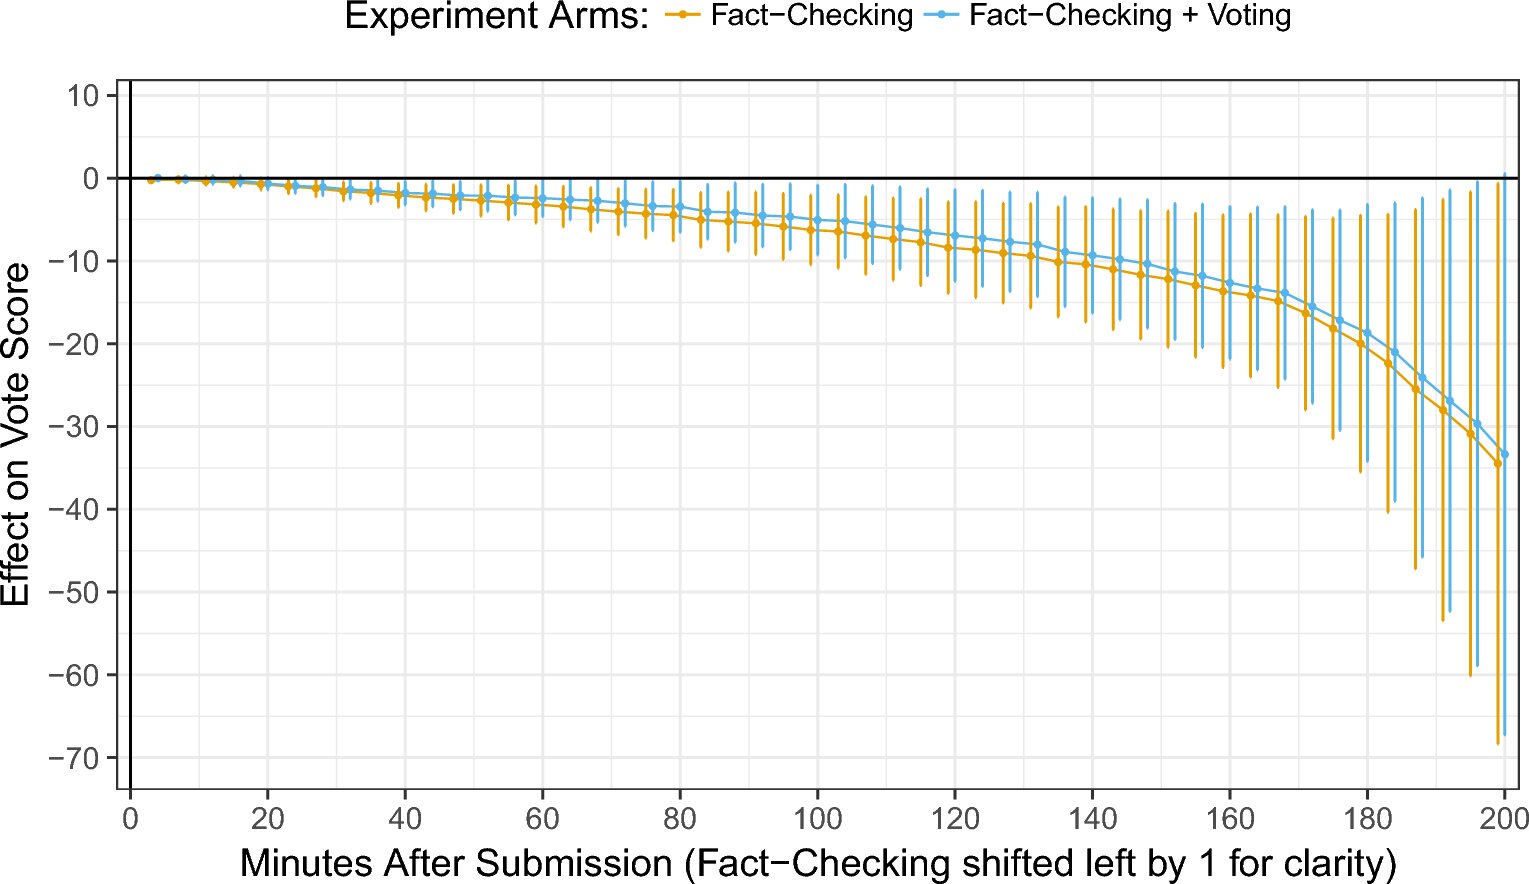 Fact-checking found to influence recommender algorithms